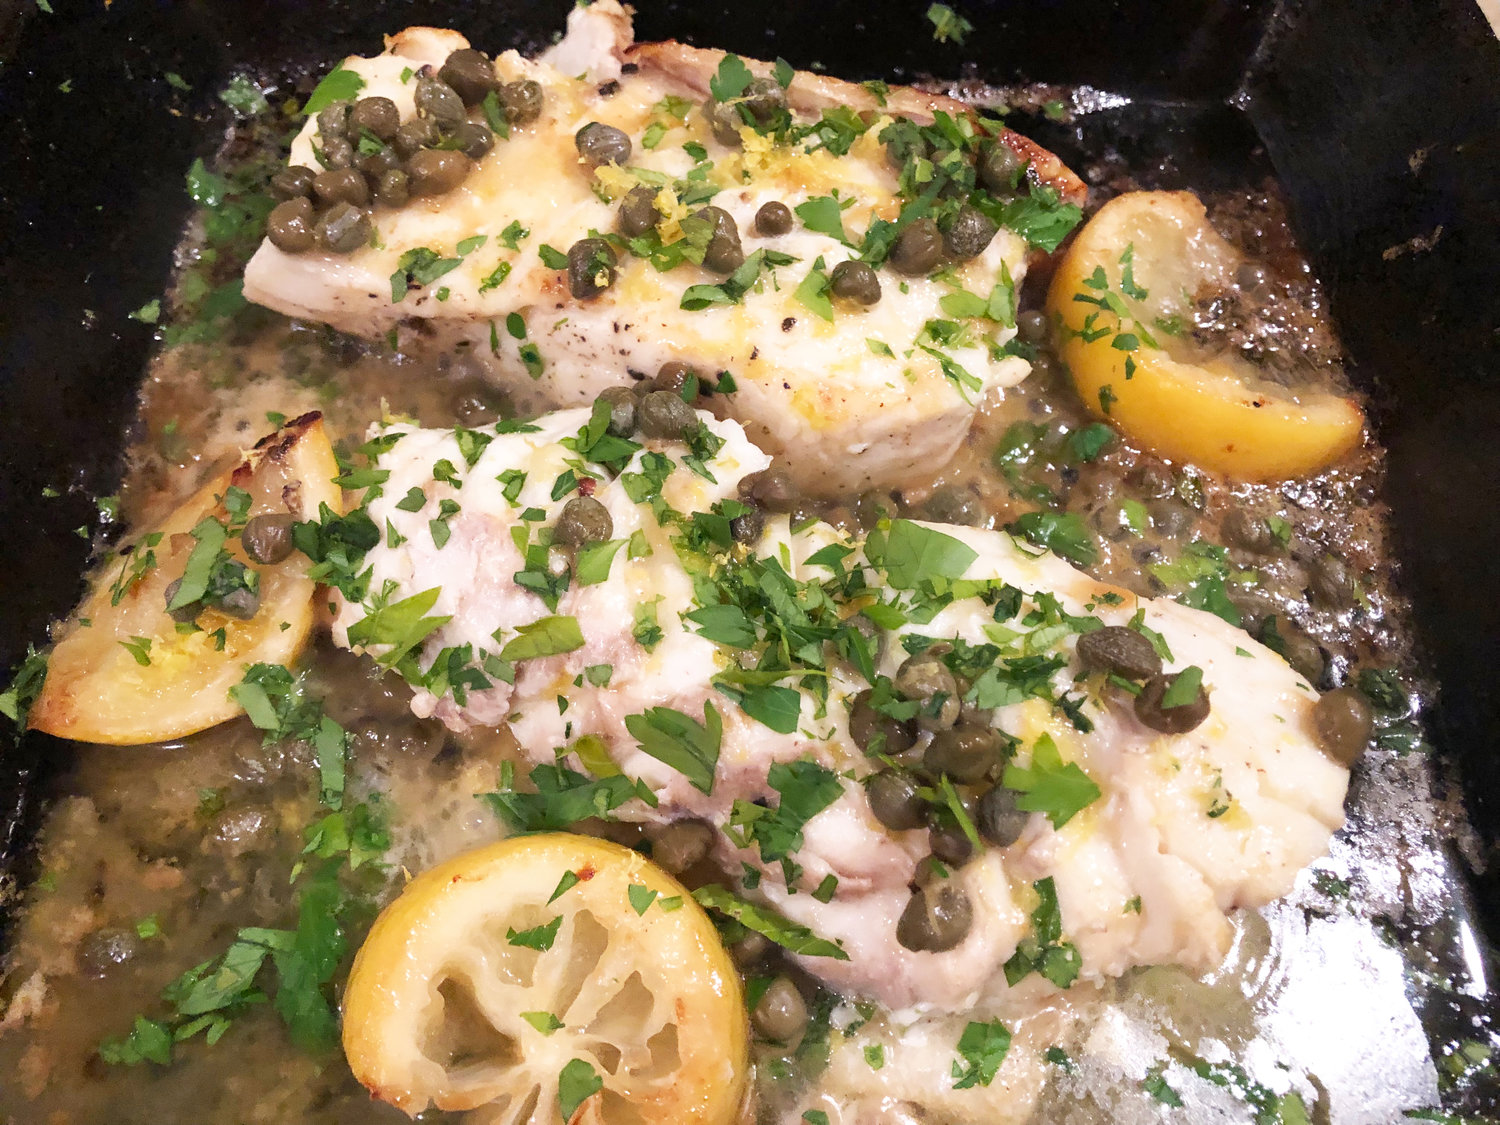 These butter-basted halibut fillets are garnished with capers, lemon zest and minced fresh parsley.